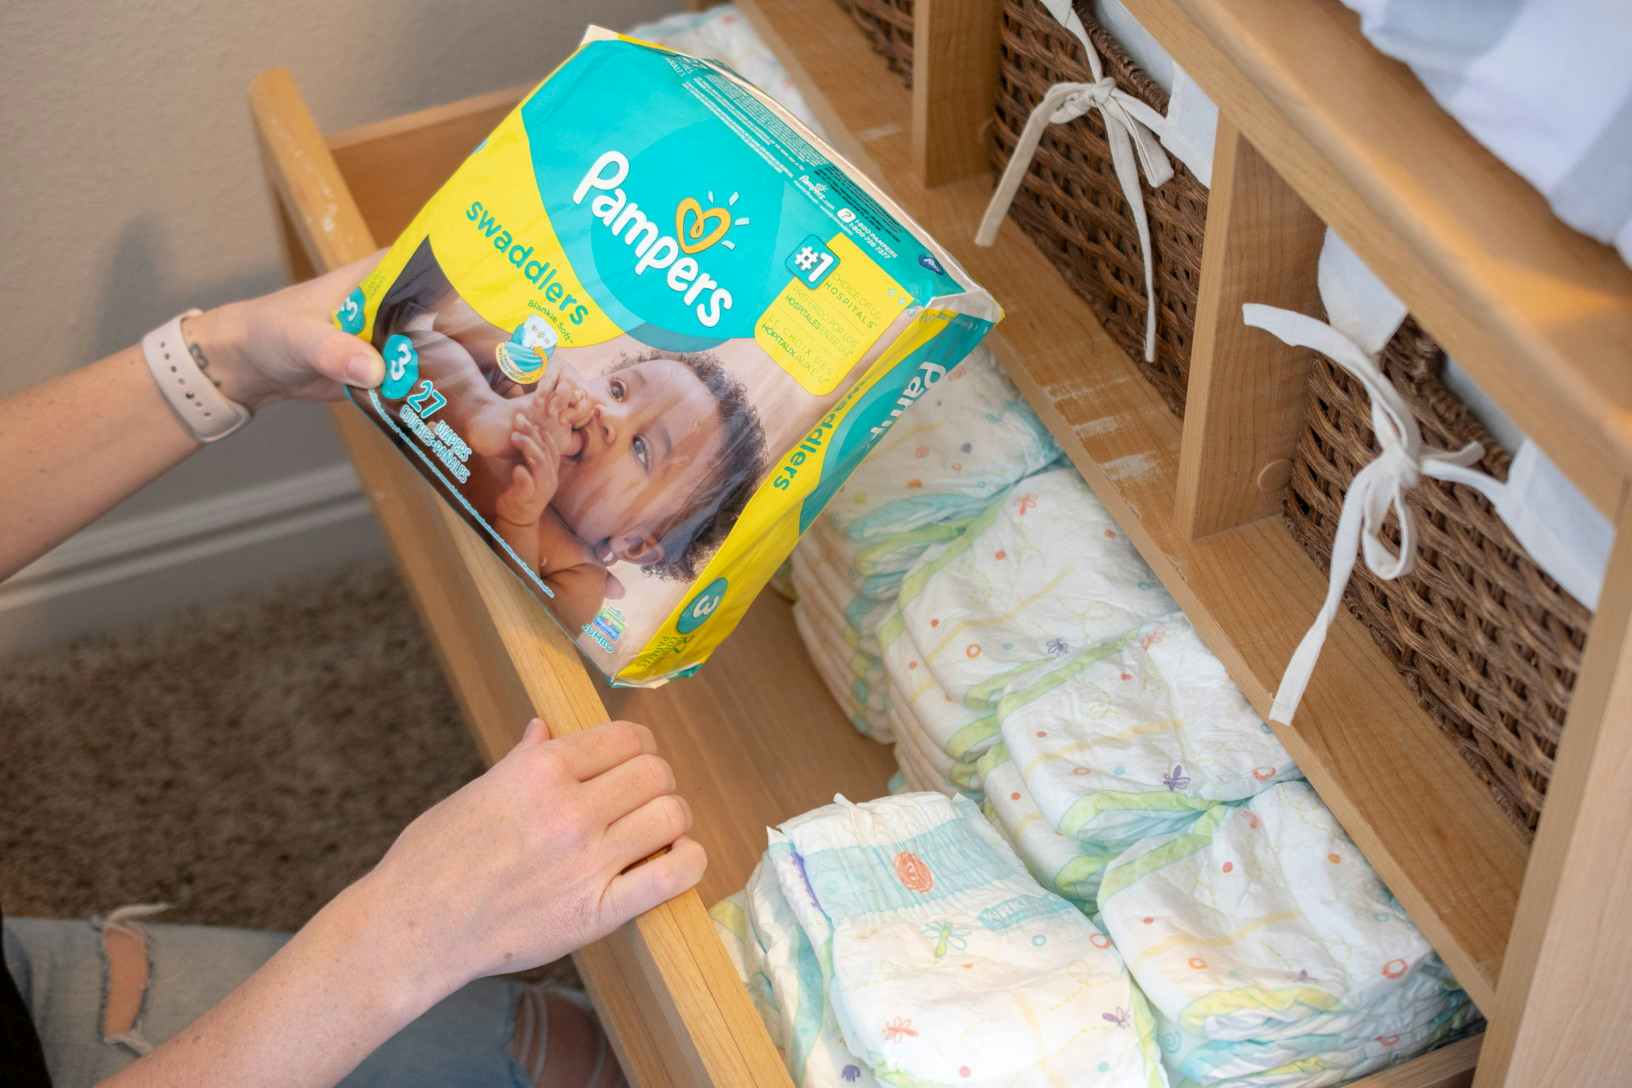 person holding pack of Pampers diapers near drawer